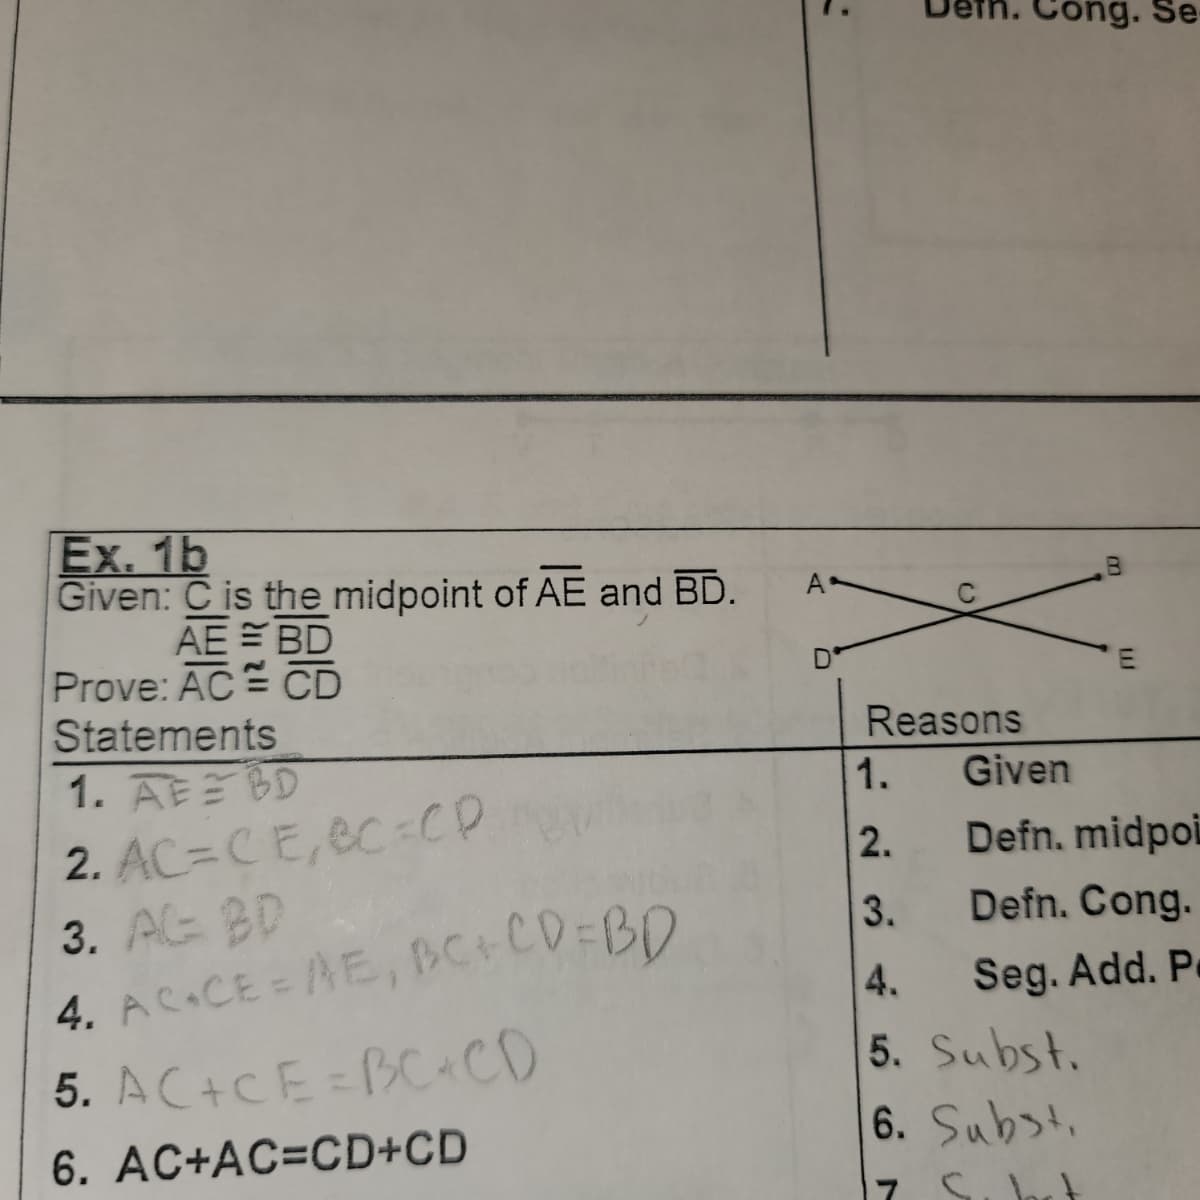 Ex. 1b
Given: C is the midpoint of AE and BD.
AE = BD
CD
Prove: AC
Statements
1. AEBD
2. AC=CE, BC=CP
3. AG BD
4. AC+CE = AE, BC+CD=BD
5. AC+CE=BC+CD
6. AC+AC=CD+CD
A
D
Reasons
1994 WN-
1.
2.
3.
4.
ong. Se-
5. Subst.
m
Given
Defn. midpoi
Defn. Cong.
Seg. Add. P.
6. Subst.
7 S. b
E